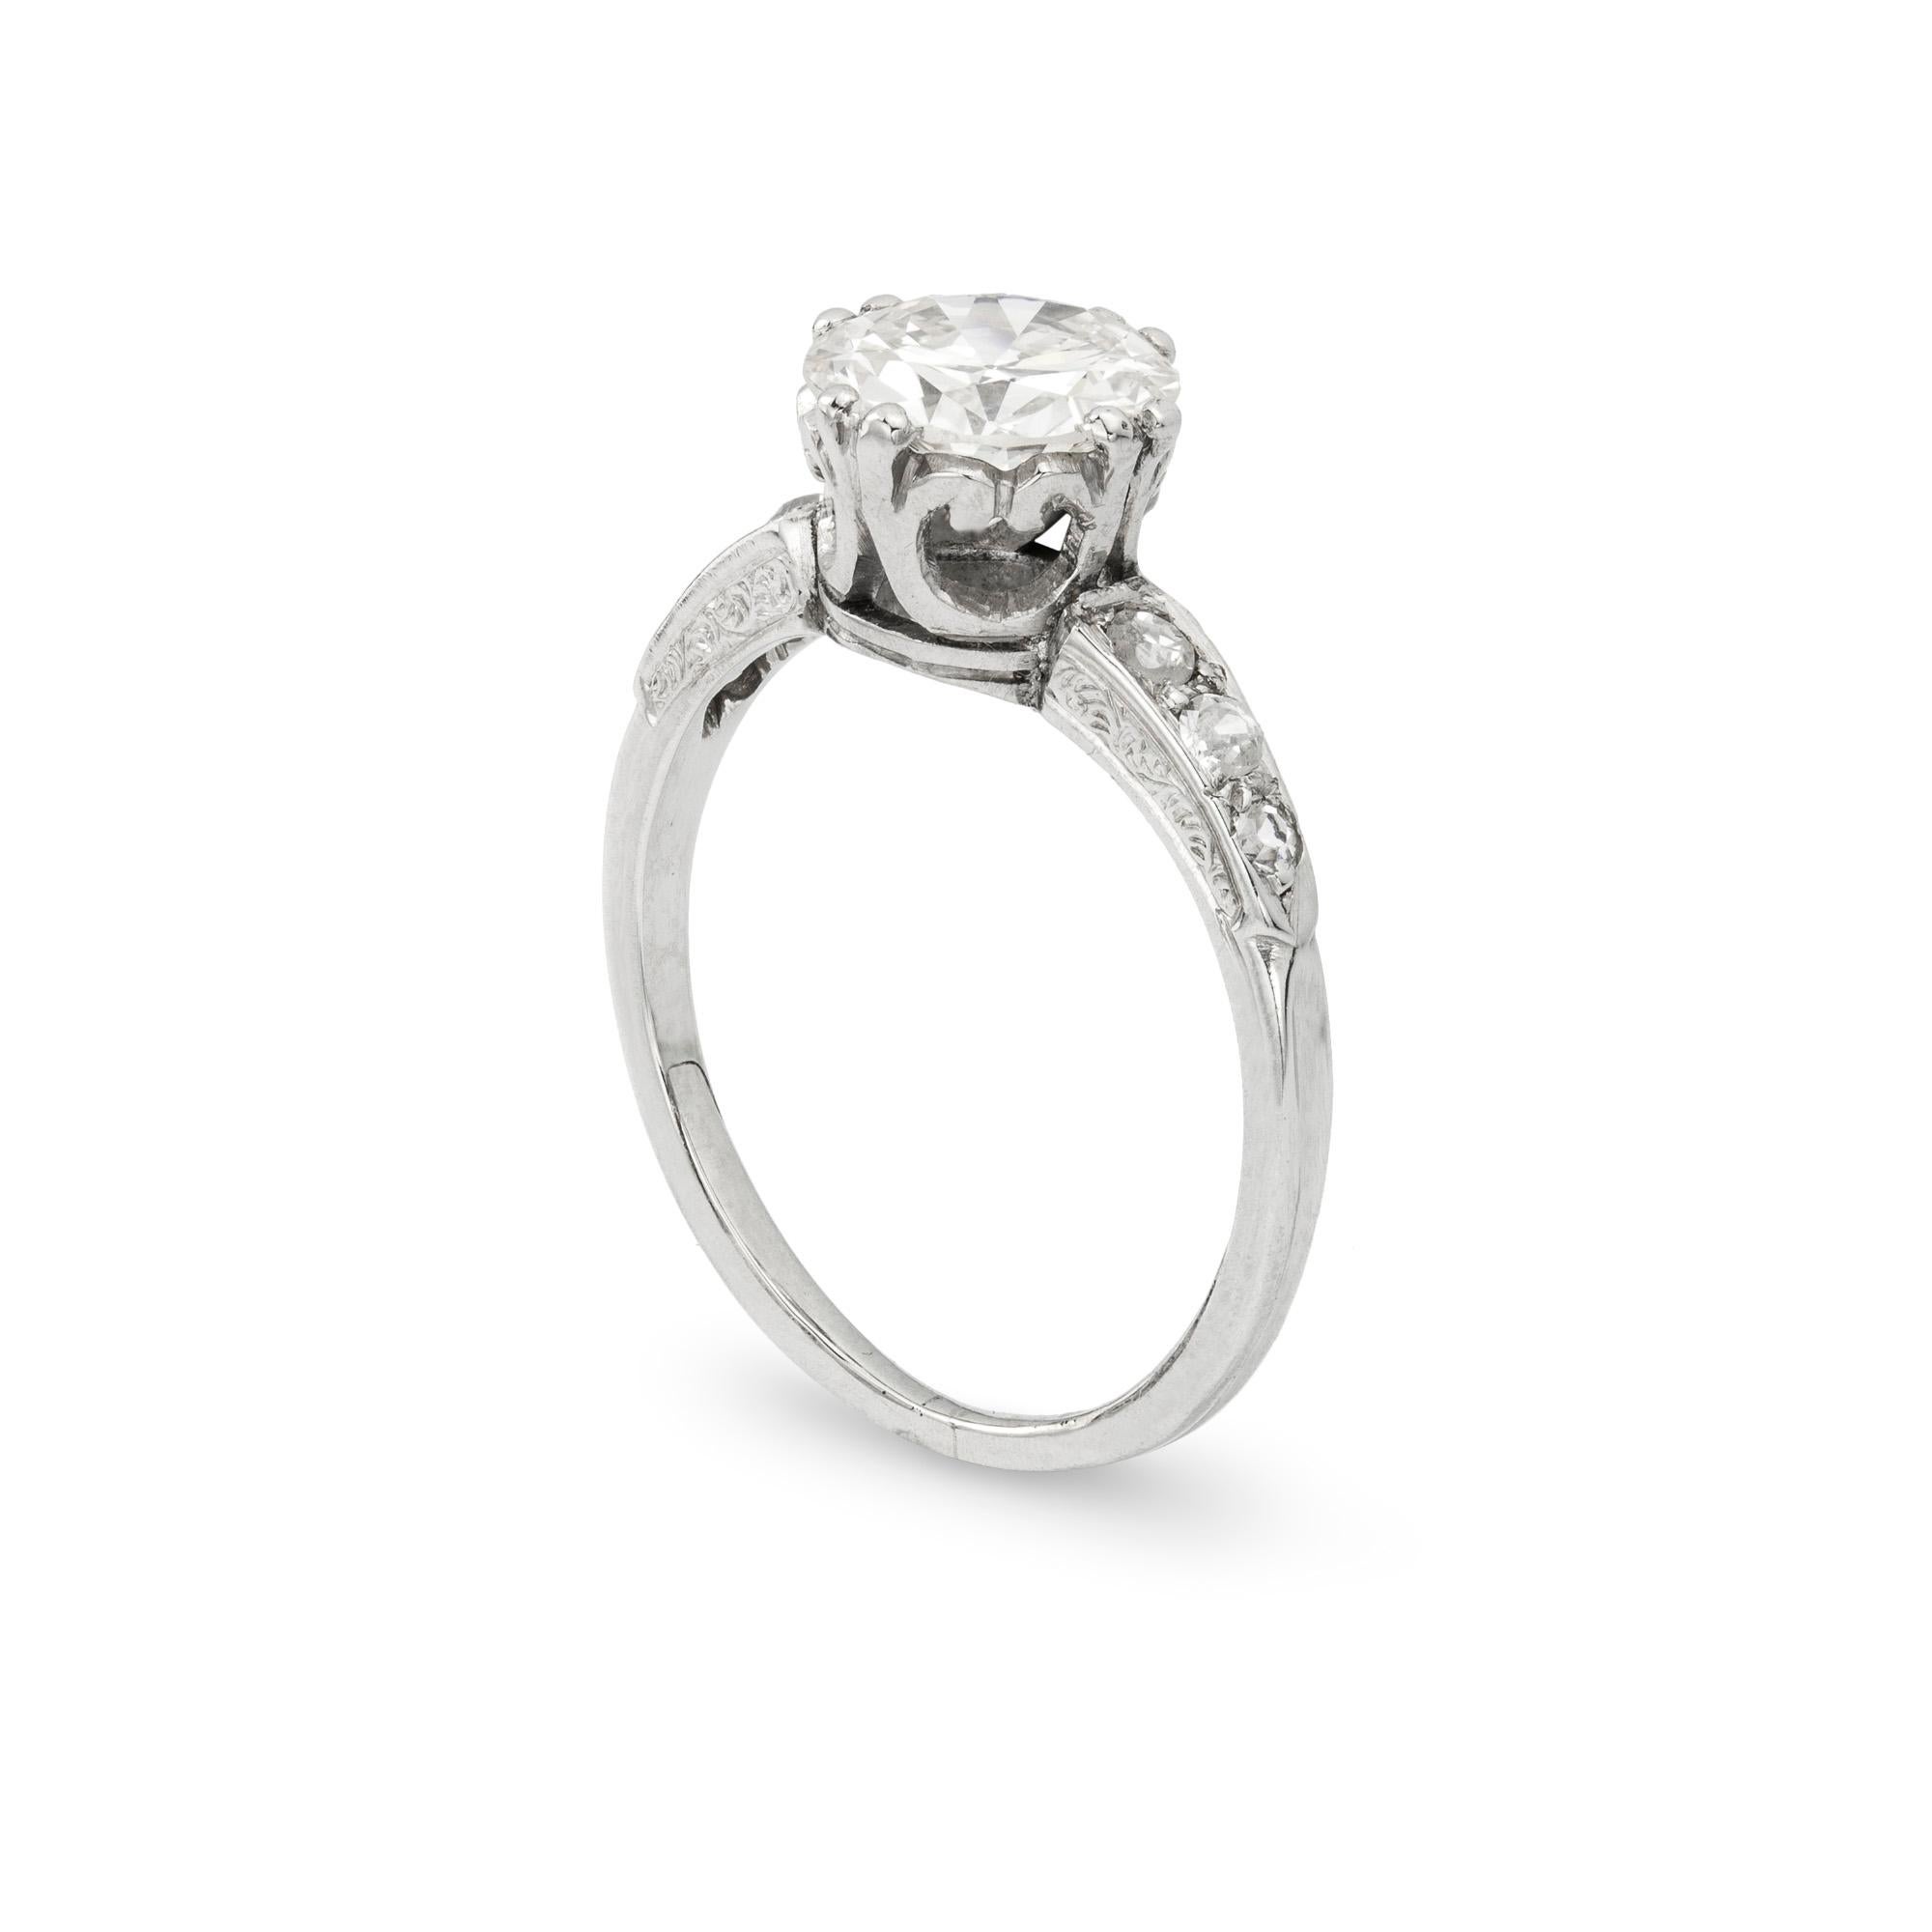 A single stone diamond ring, the brilliant-cut diamond weighing 1.03 carats of K colour and I1 clarity, shoulders set with graduating diamond-set shoulders, to a carved mount and ribbed shank, all in platinum, circa 1930, later hallmarked 950